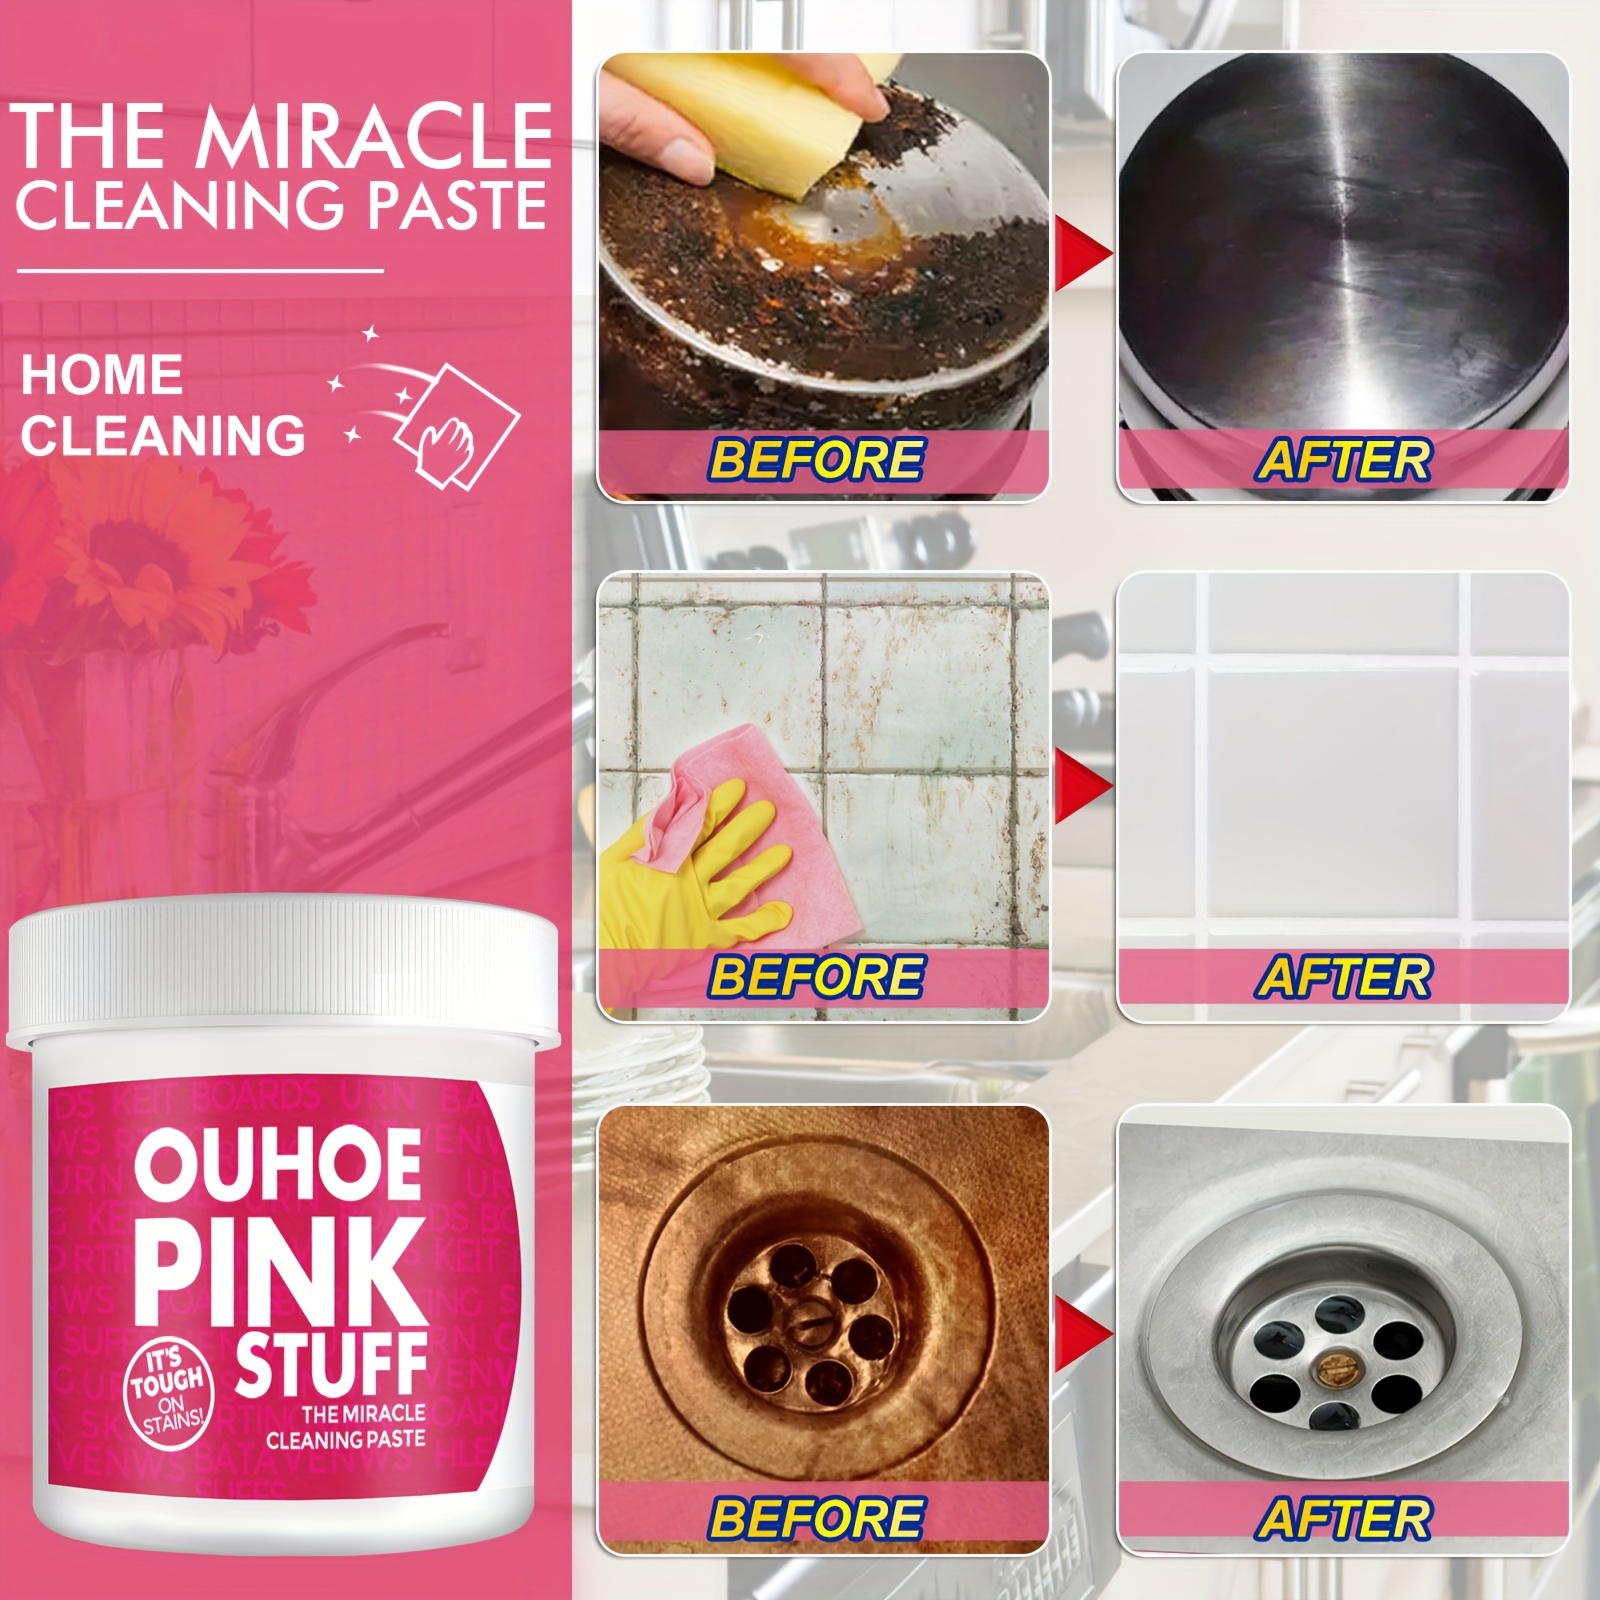 The Pink Stuff - Miracle Cleaning Paste